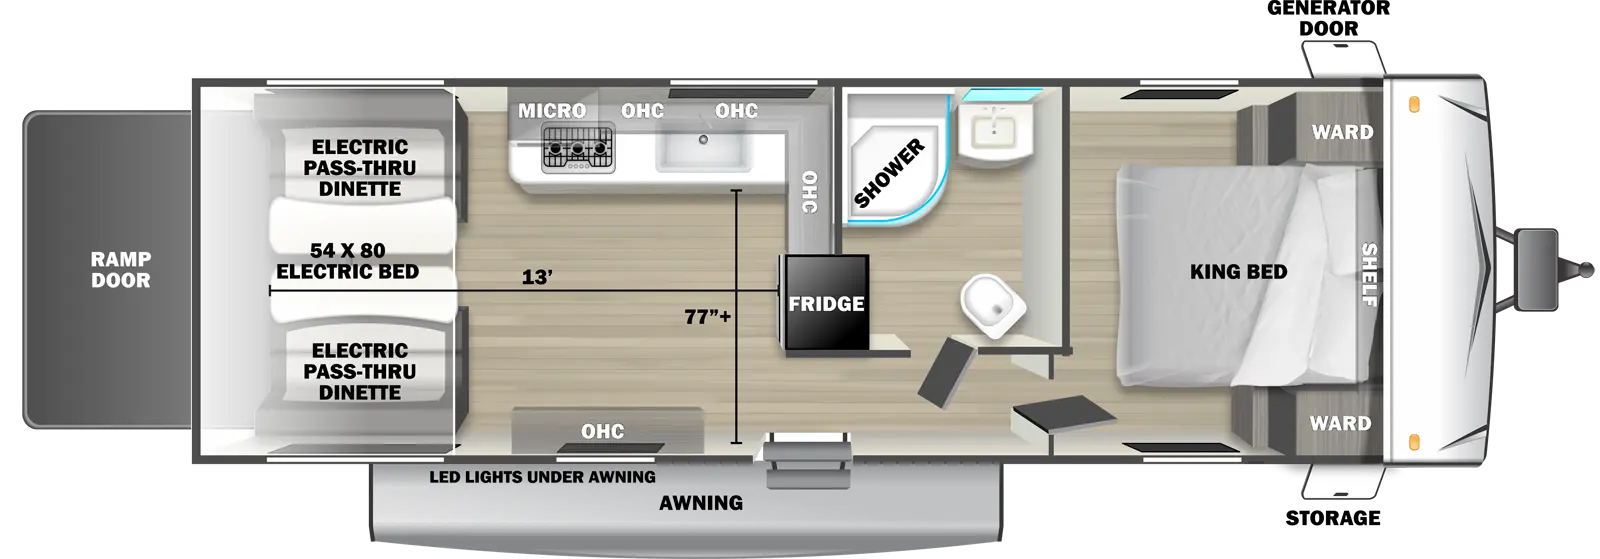 The 2550RLX travel trailer has no slide outs, 1 entry door and 1 rear ramp door. Exterior features include an awning with LED lights, front door side storage and front off-door side generator door. Interior layout from front to back includes: front bedroom with foot-facing King bed, shelf over the bed, and front corner wardrobes; off-door side bathroom with shower, linen storage, toilet and single sink vanity; off-door side kitchen with L-shaped countertop, overhead microwave, overhead cabinets, sink and refrigerator; door side overhead cabinet; rear 54 x 80 electric bed over electric pass-through dinette. Cargo length from rear of unit to refrigerator is 13 ft. Cargo width from kitchen countertop to door side wall is 77 inches.